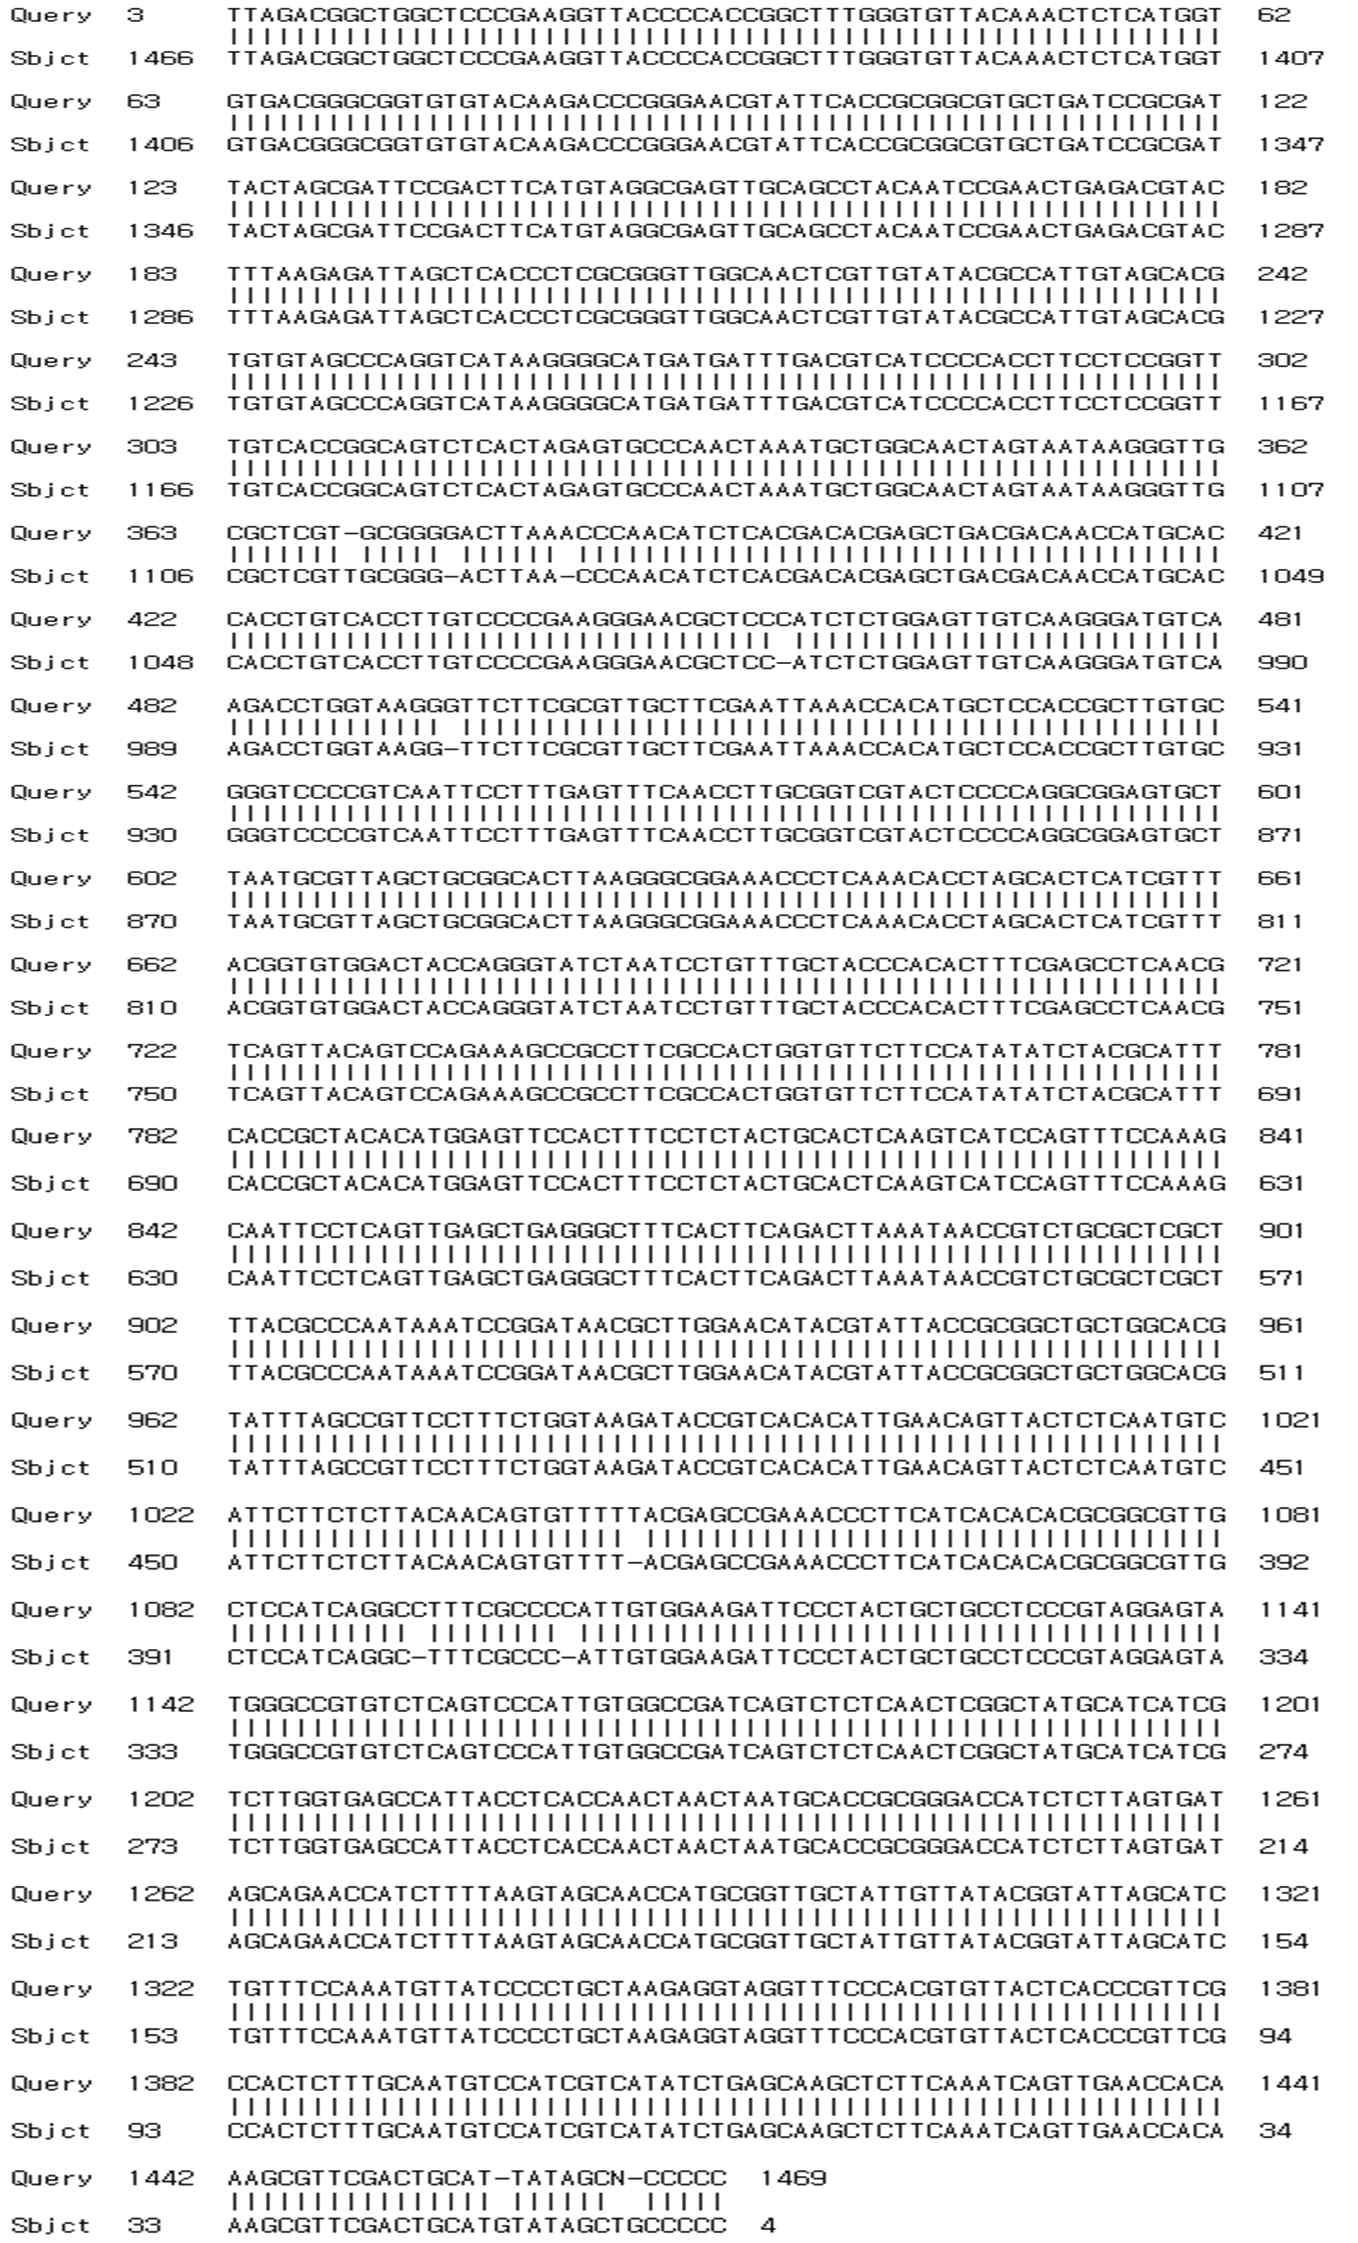 16S rRNA sequencing of F-24 strain